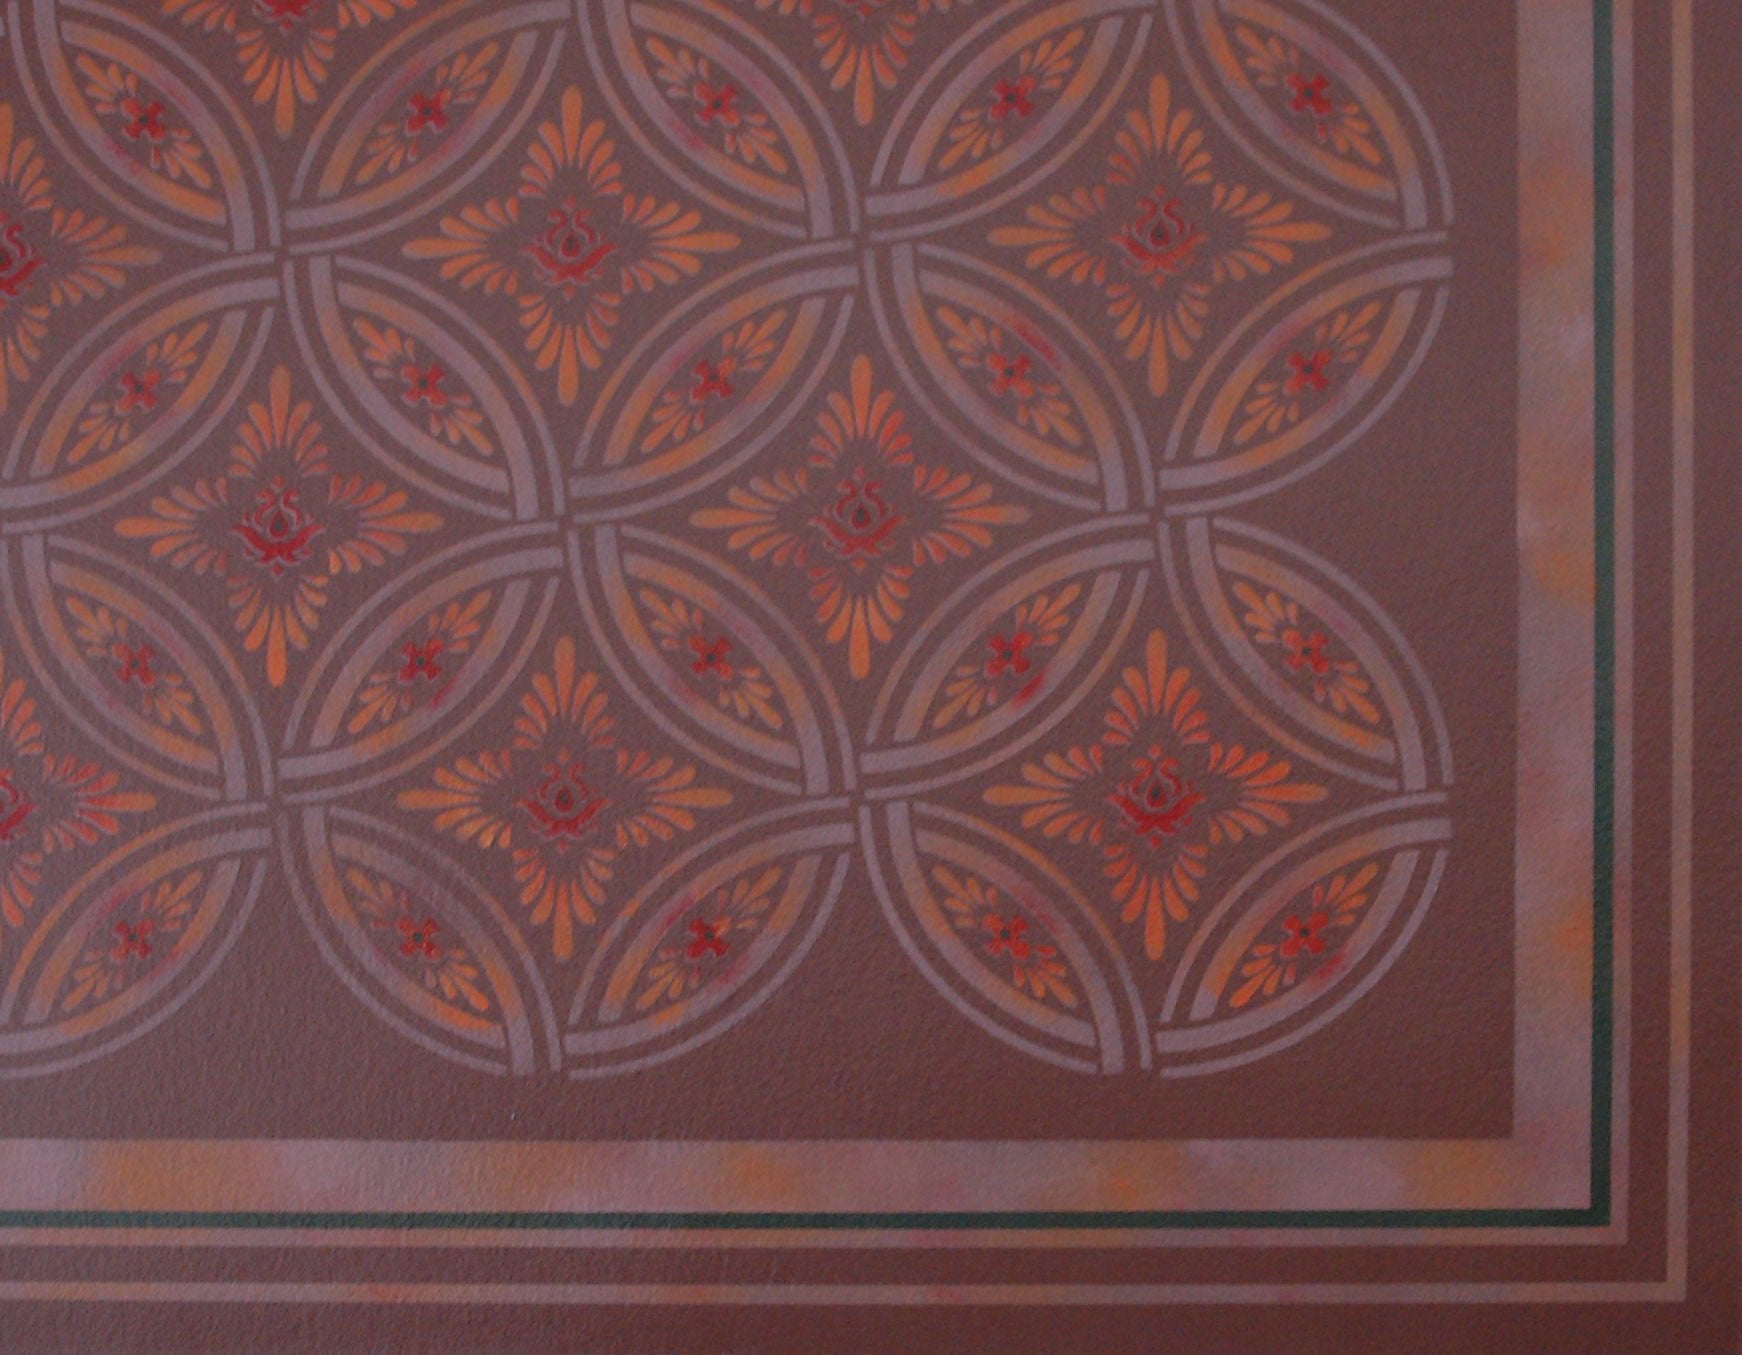 A close up of the corner and interlocking circle motifs for Grace Floorcloth #2.